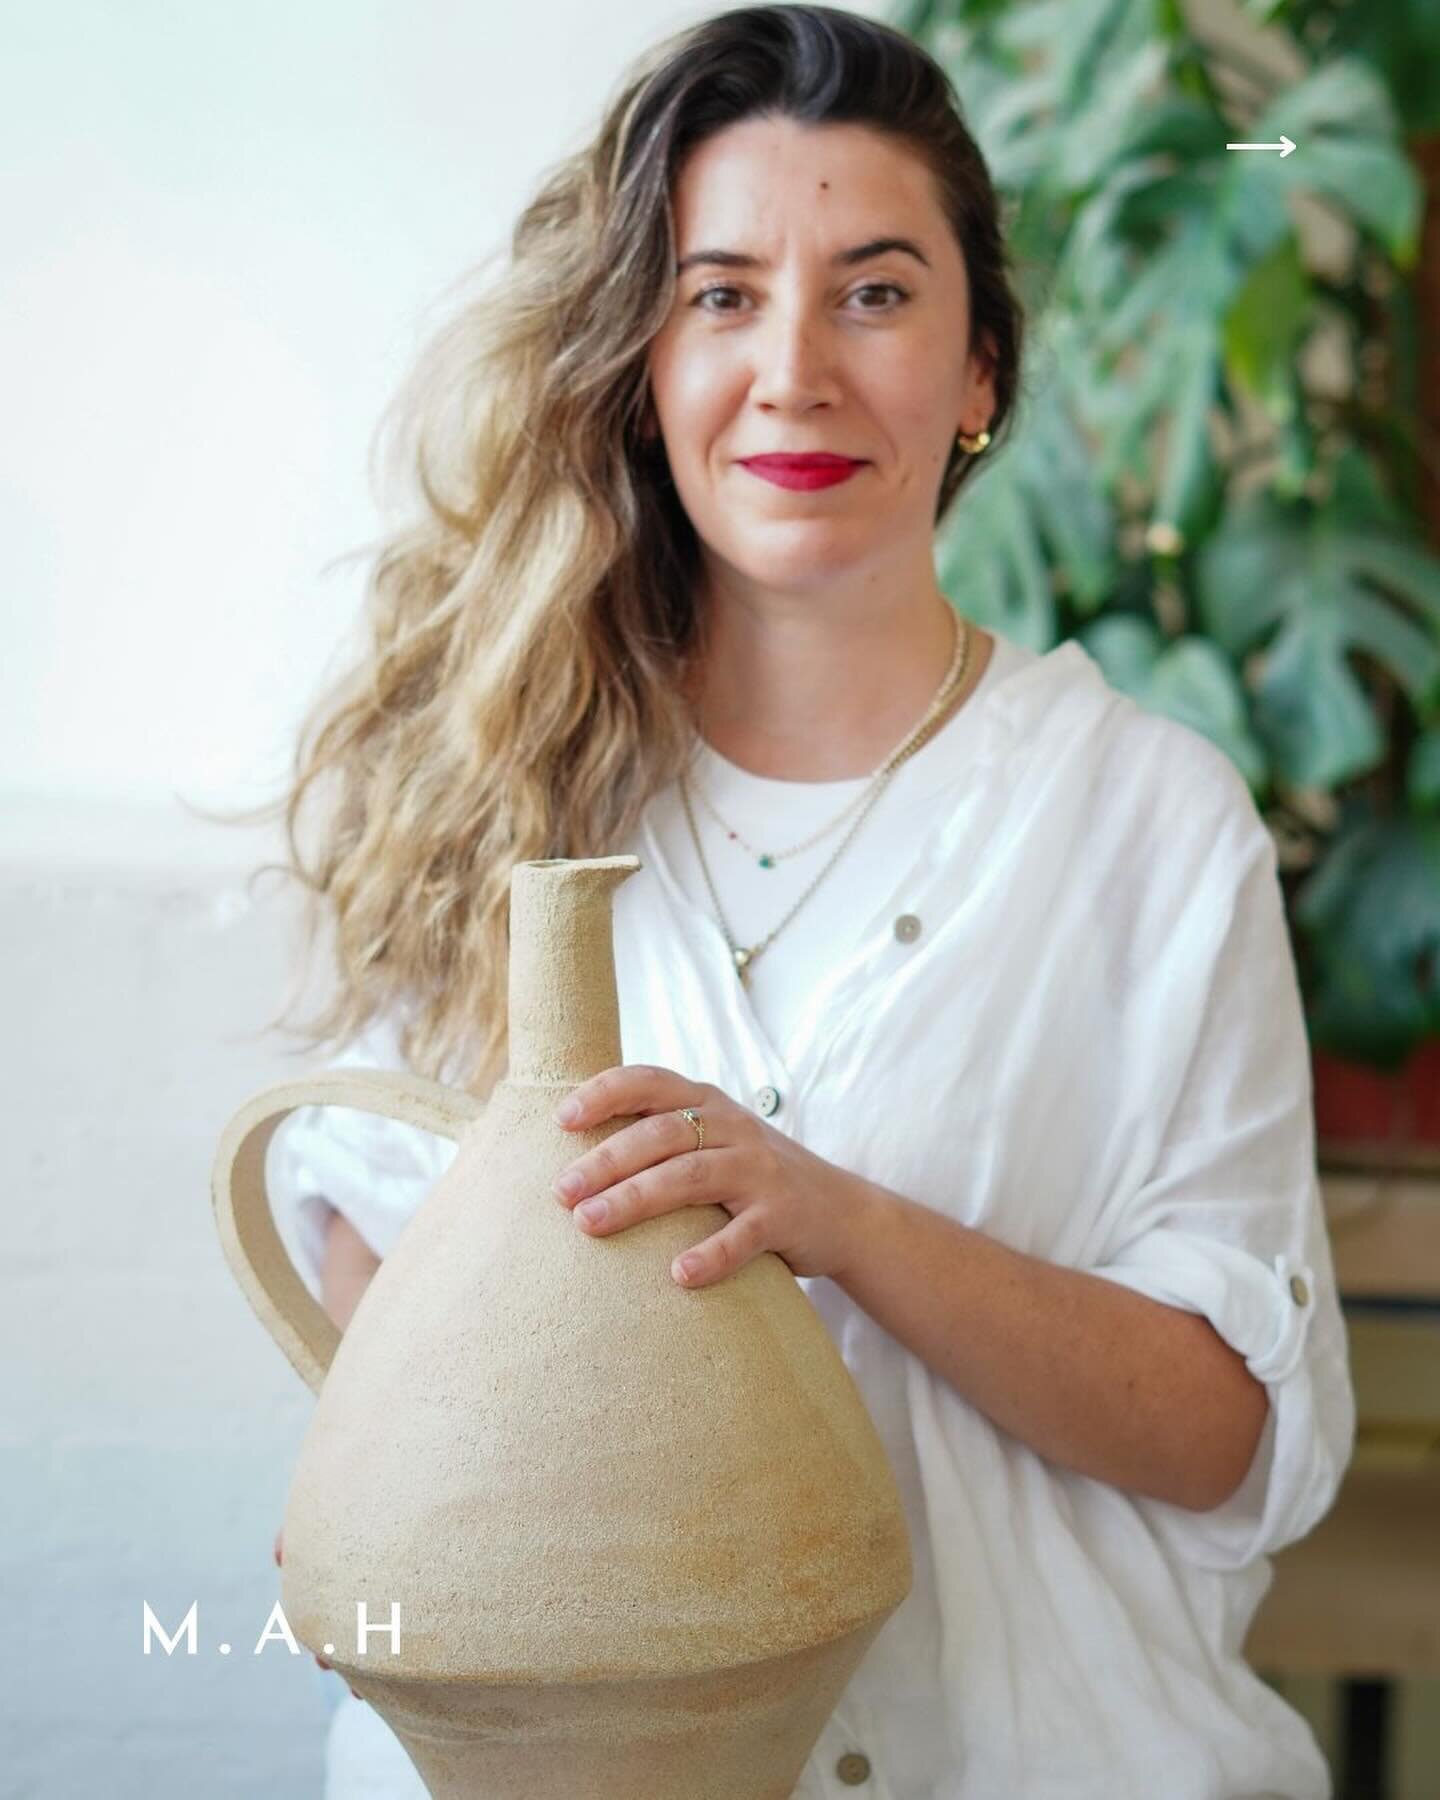 Meet Ayse Habibe Kucuk, a sculptural ceramic artist from Gaziantep, Turkey. 

She draws inspiration from her hometown&rsquo;s rich traditions. Ayse&rsquo;s Hackney studio is a haven where cultural heritage meets contemporary art, as she skillfully bl